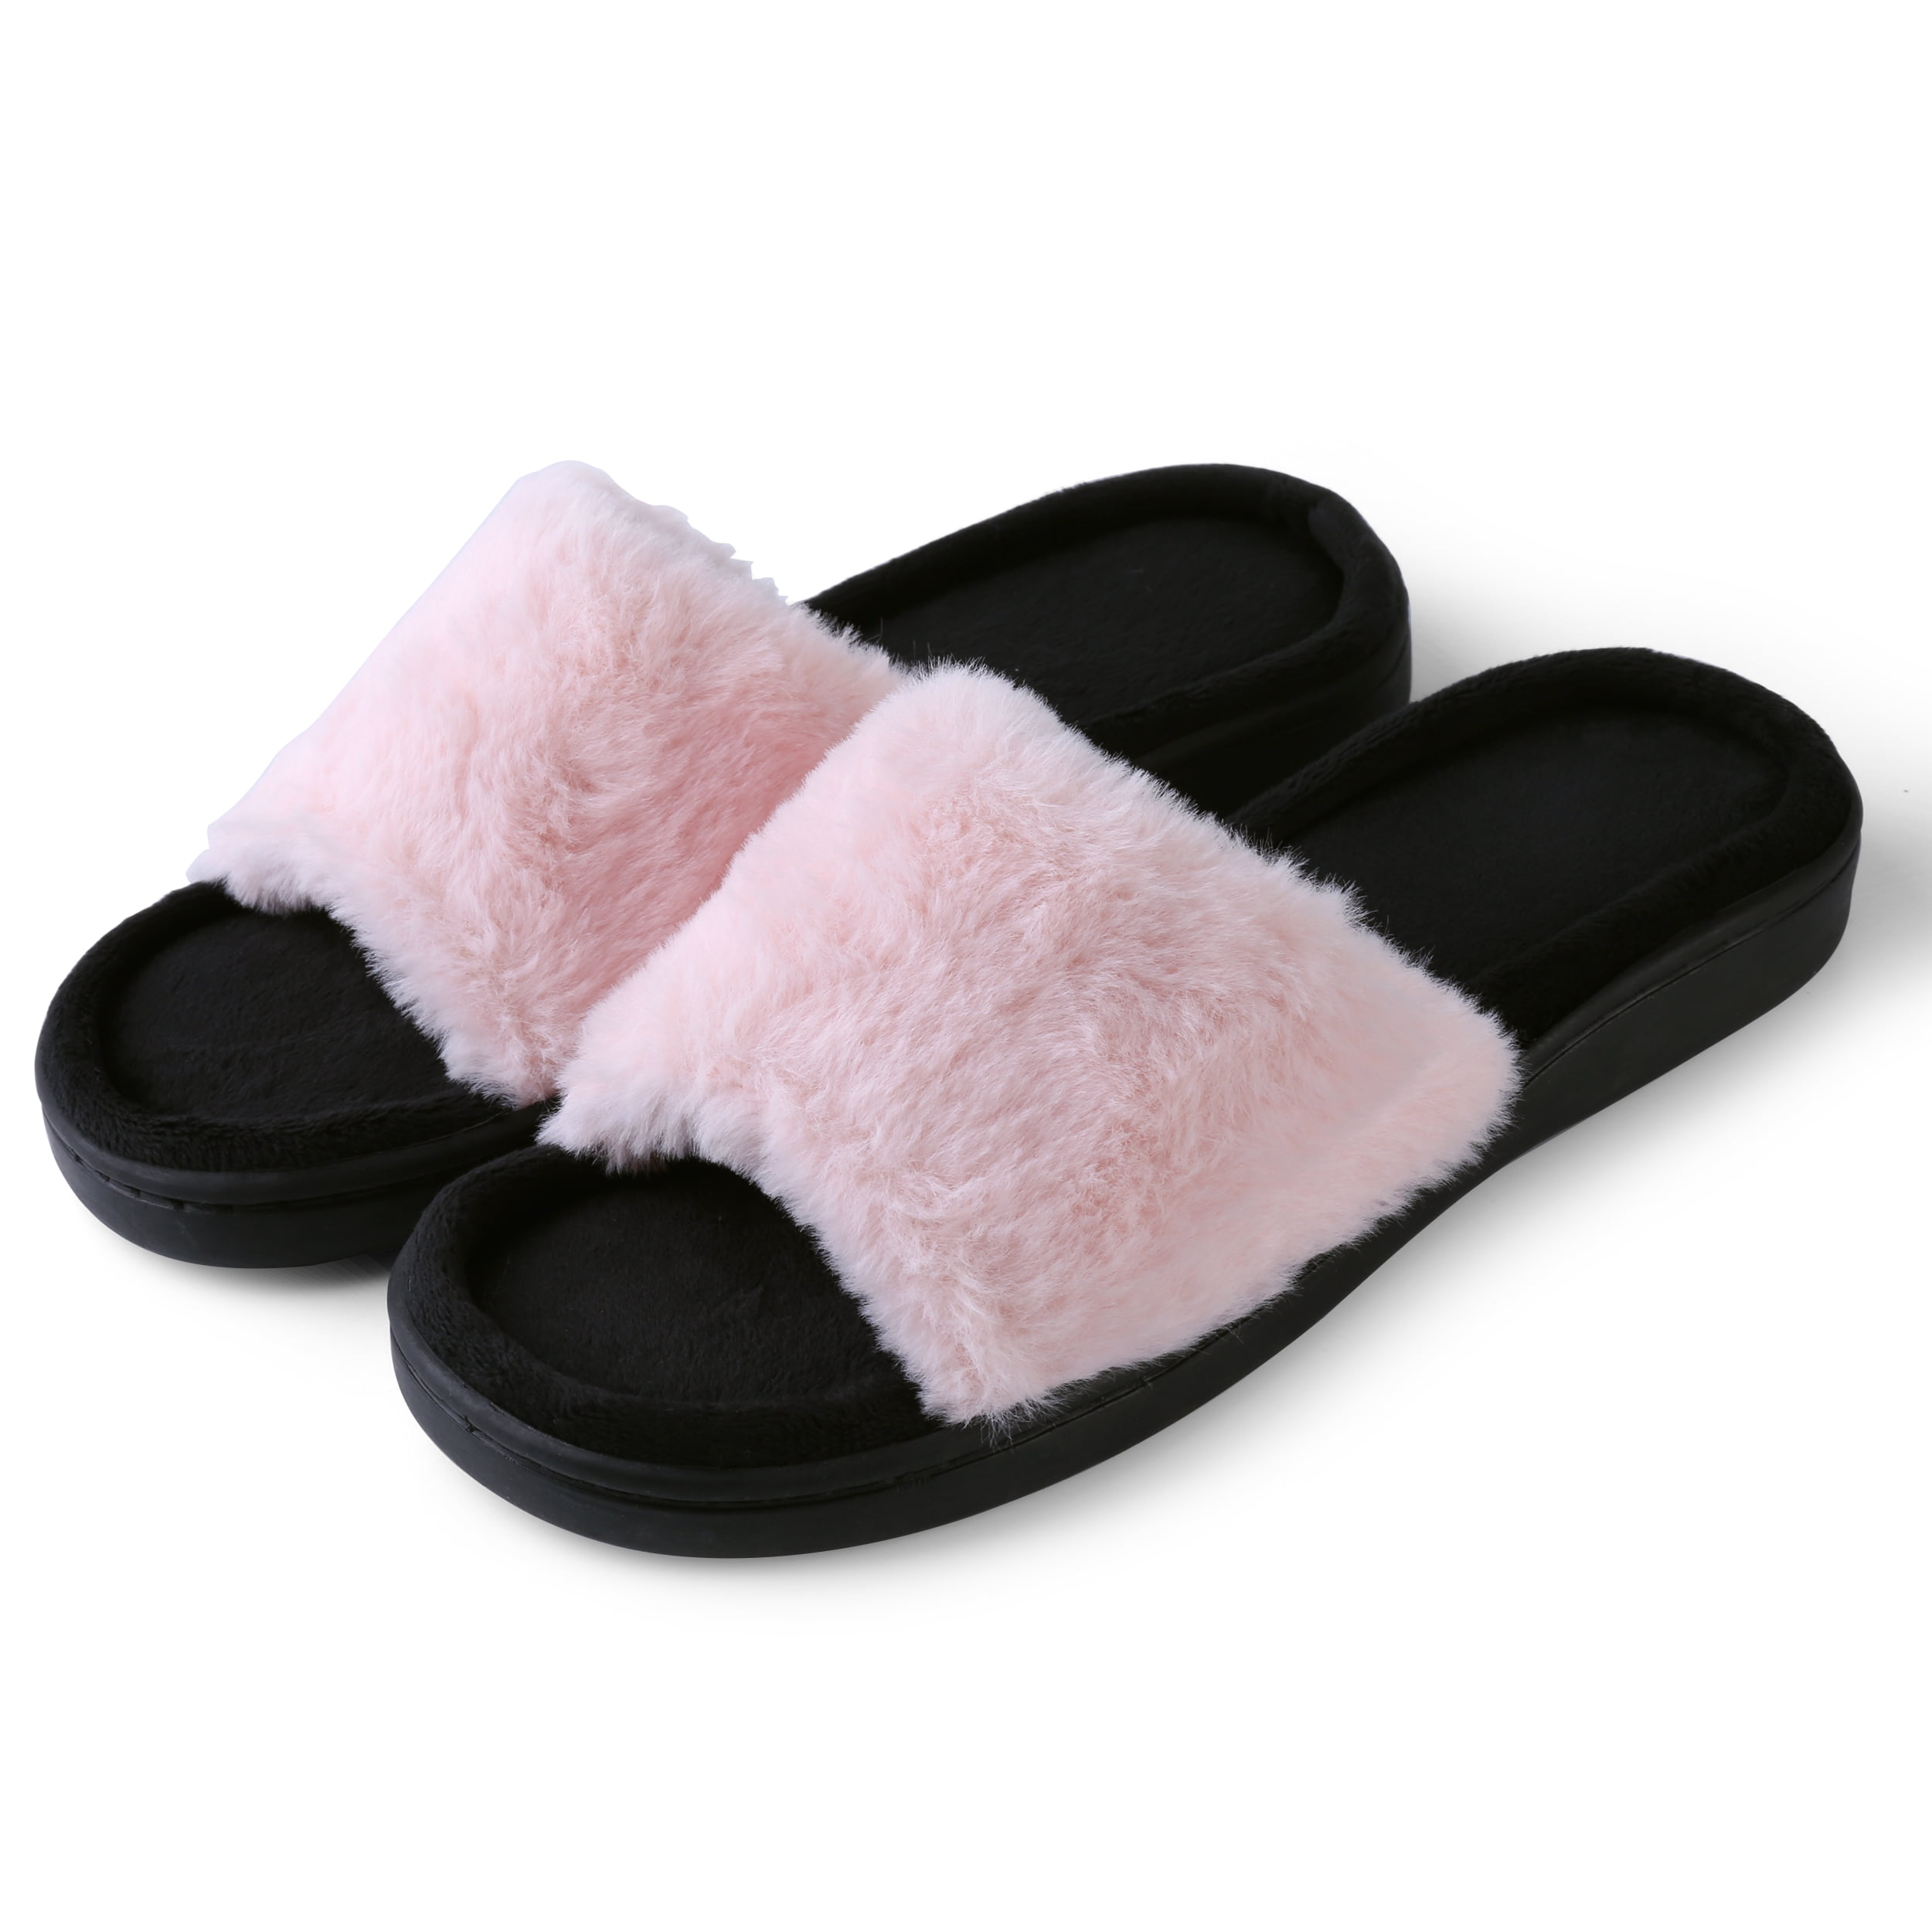 Aerusi Girl Fashion Winter Indoor Shoes House Warm Soft Slipper Size 6-9 Pink